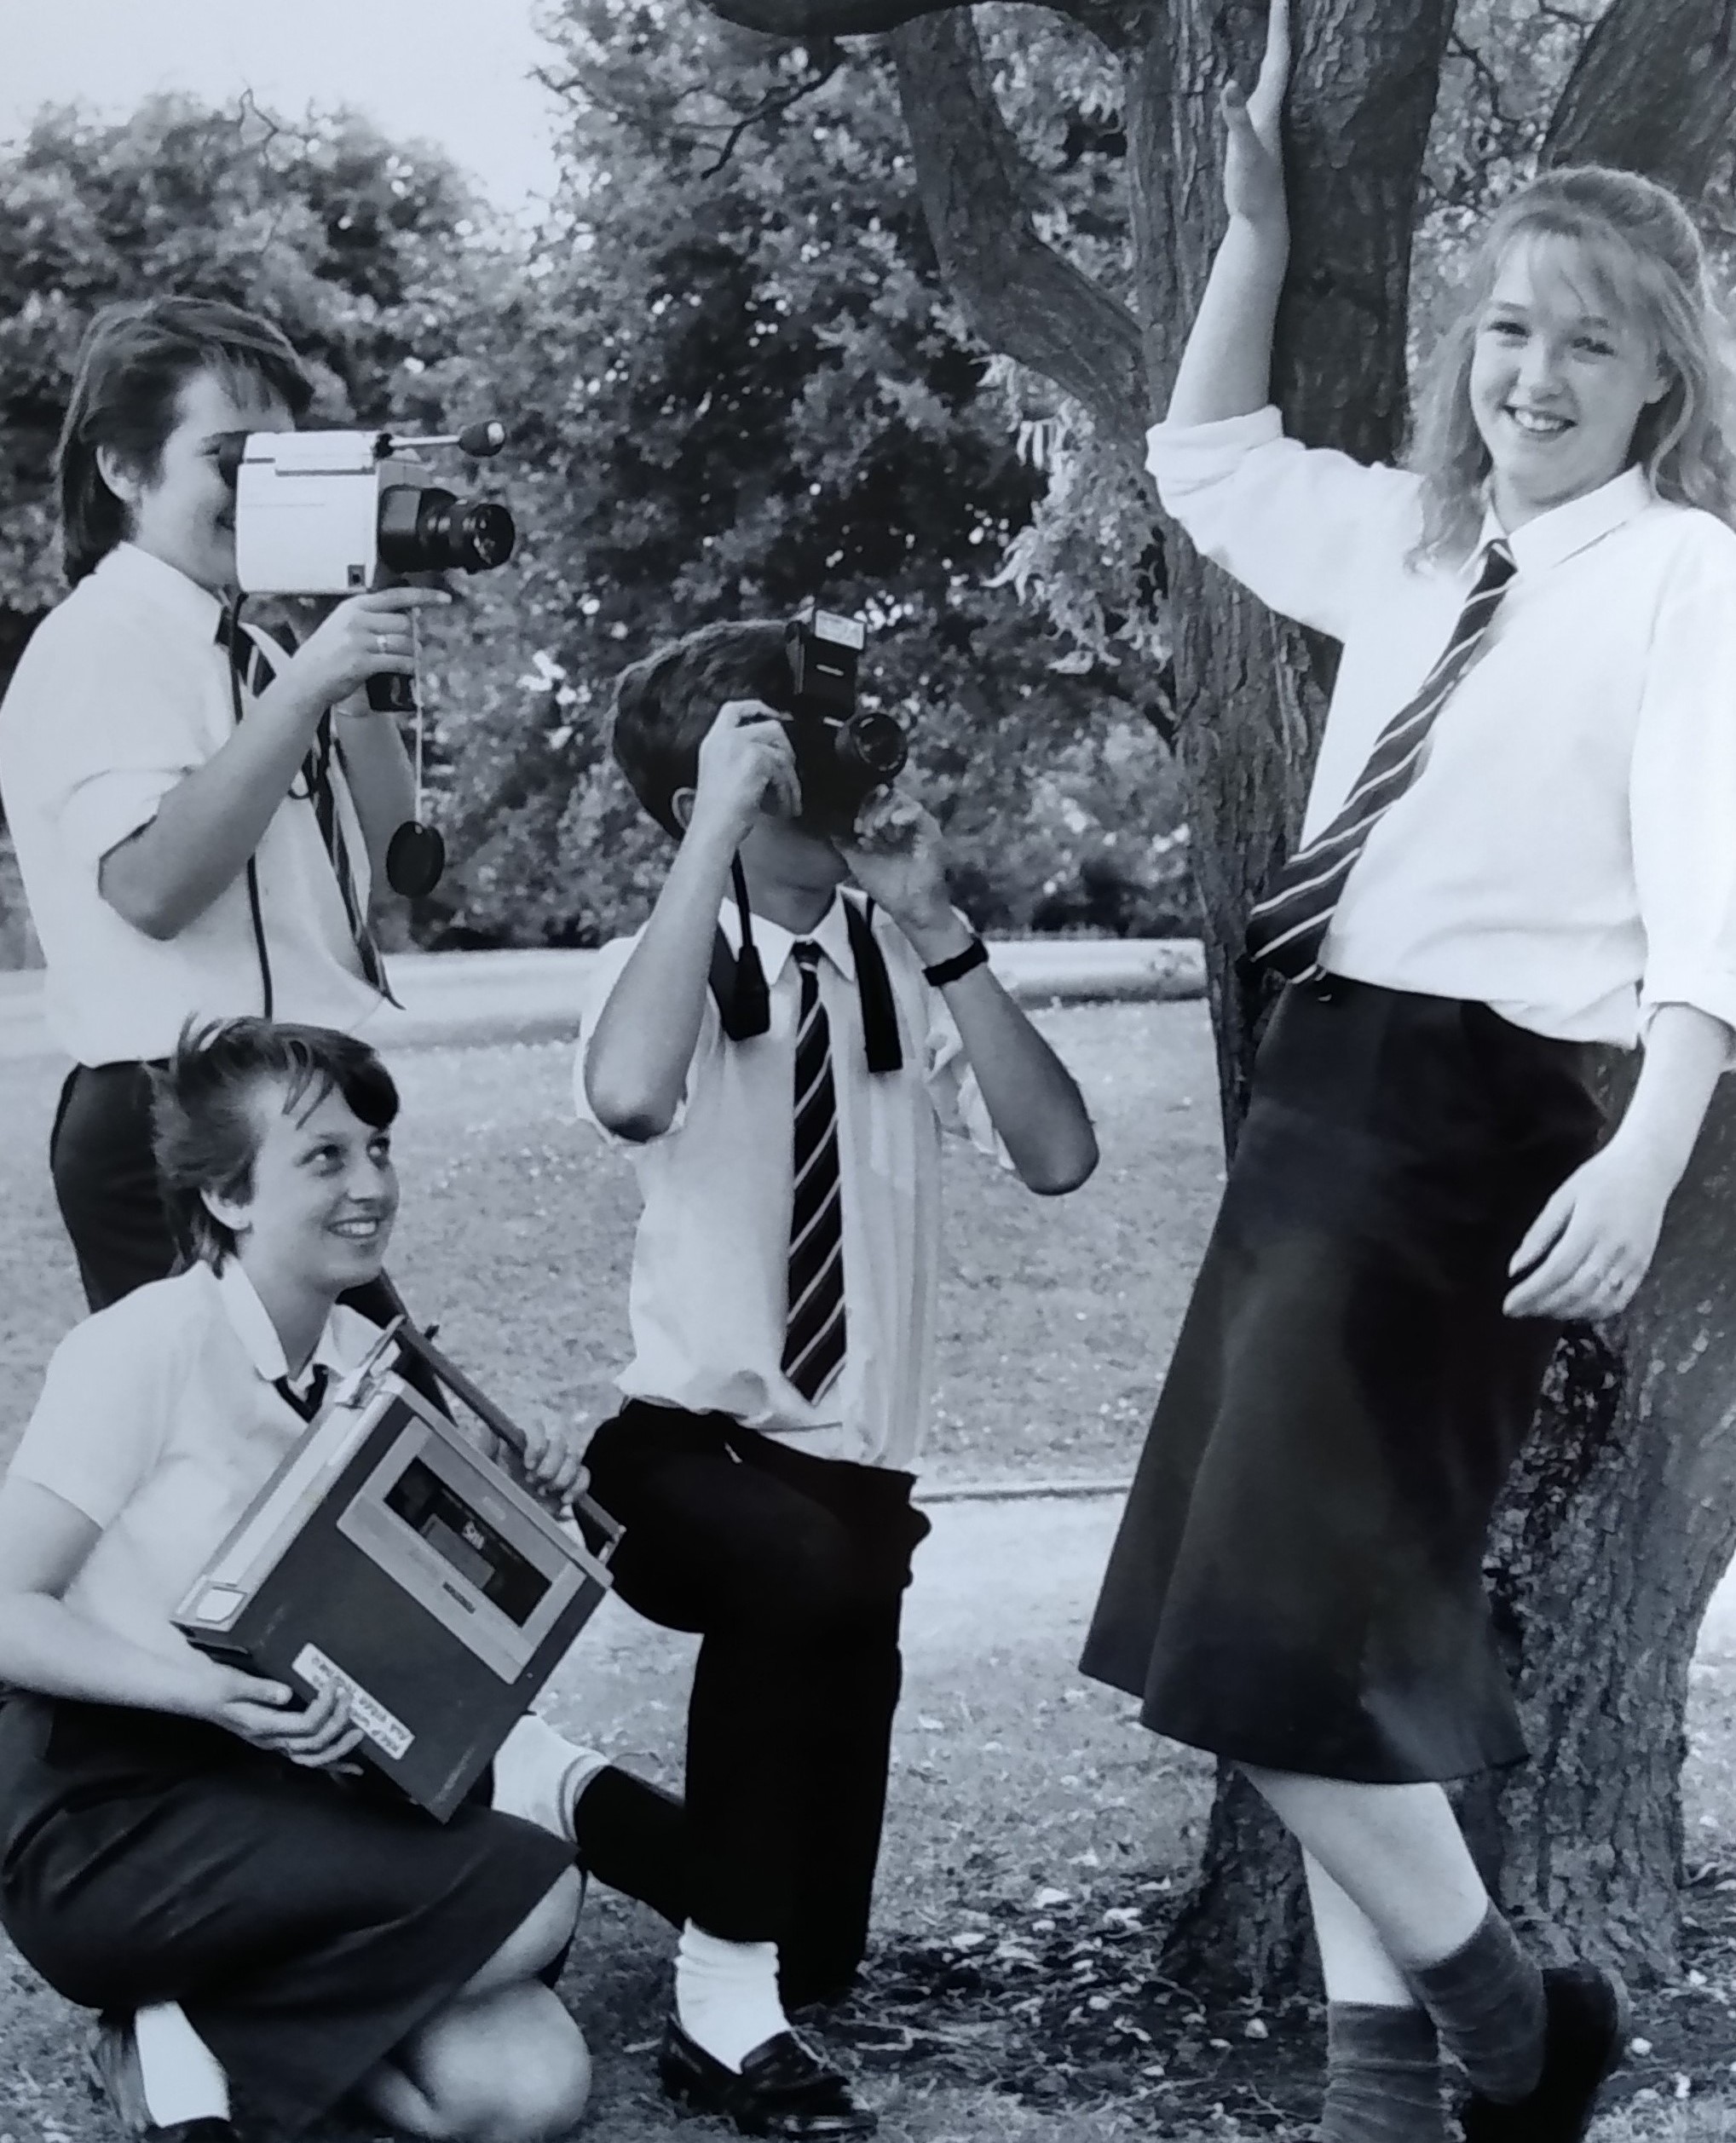 July 1988 and fourth year pupils were taking part in an exercise running their own business. From left, Claire Roberts, Corinne Sandyford-Sykes, Justin Russell and Karen Stokes hit on the novel idea of making a film